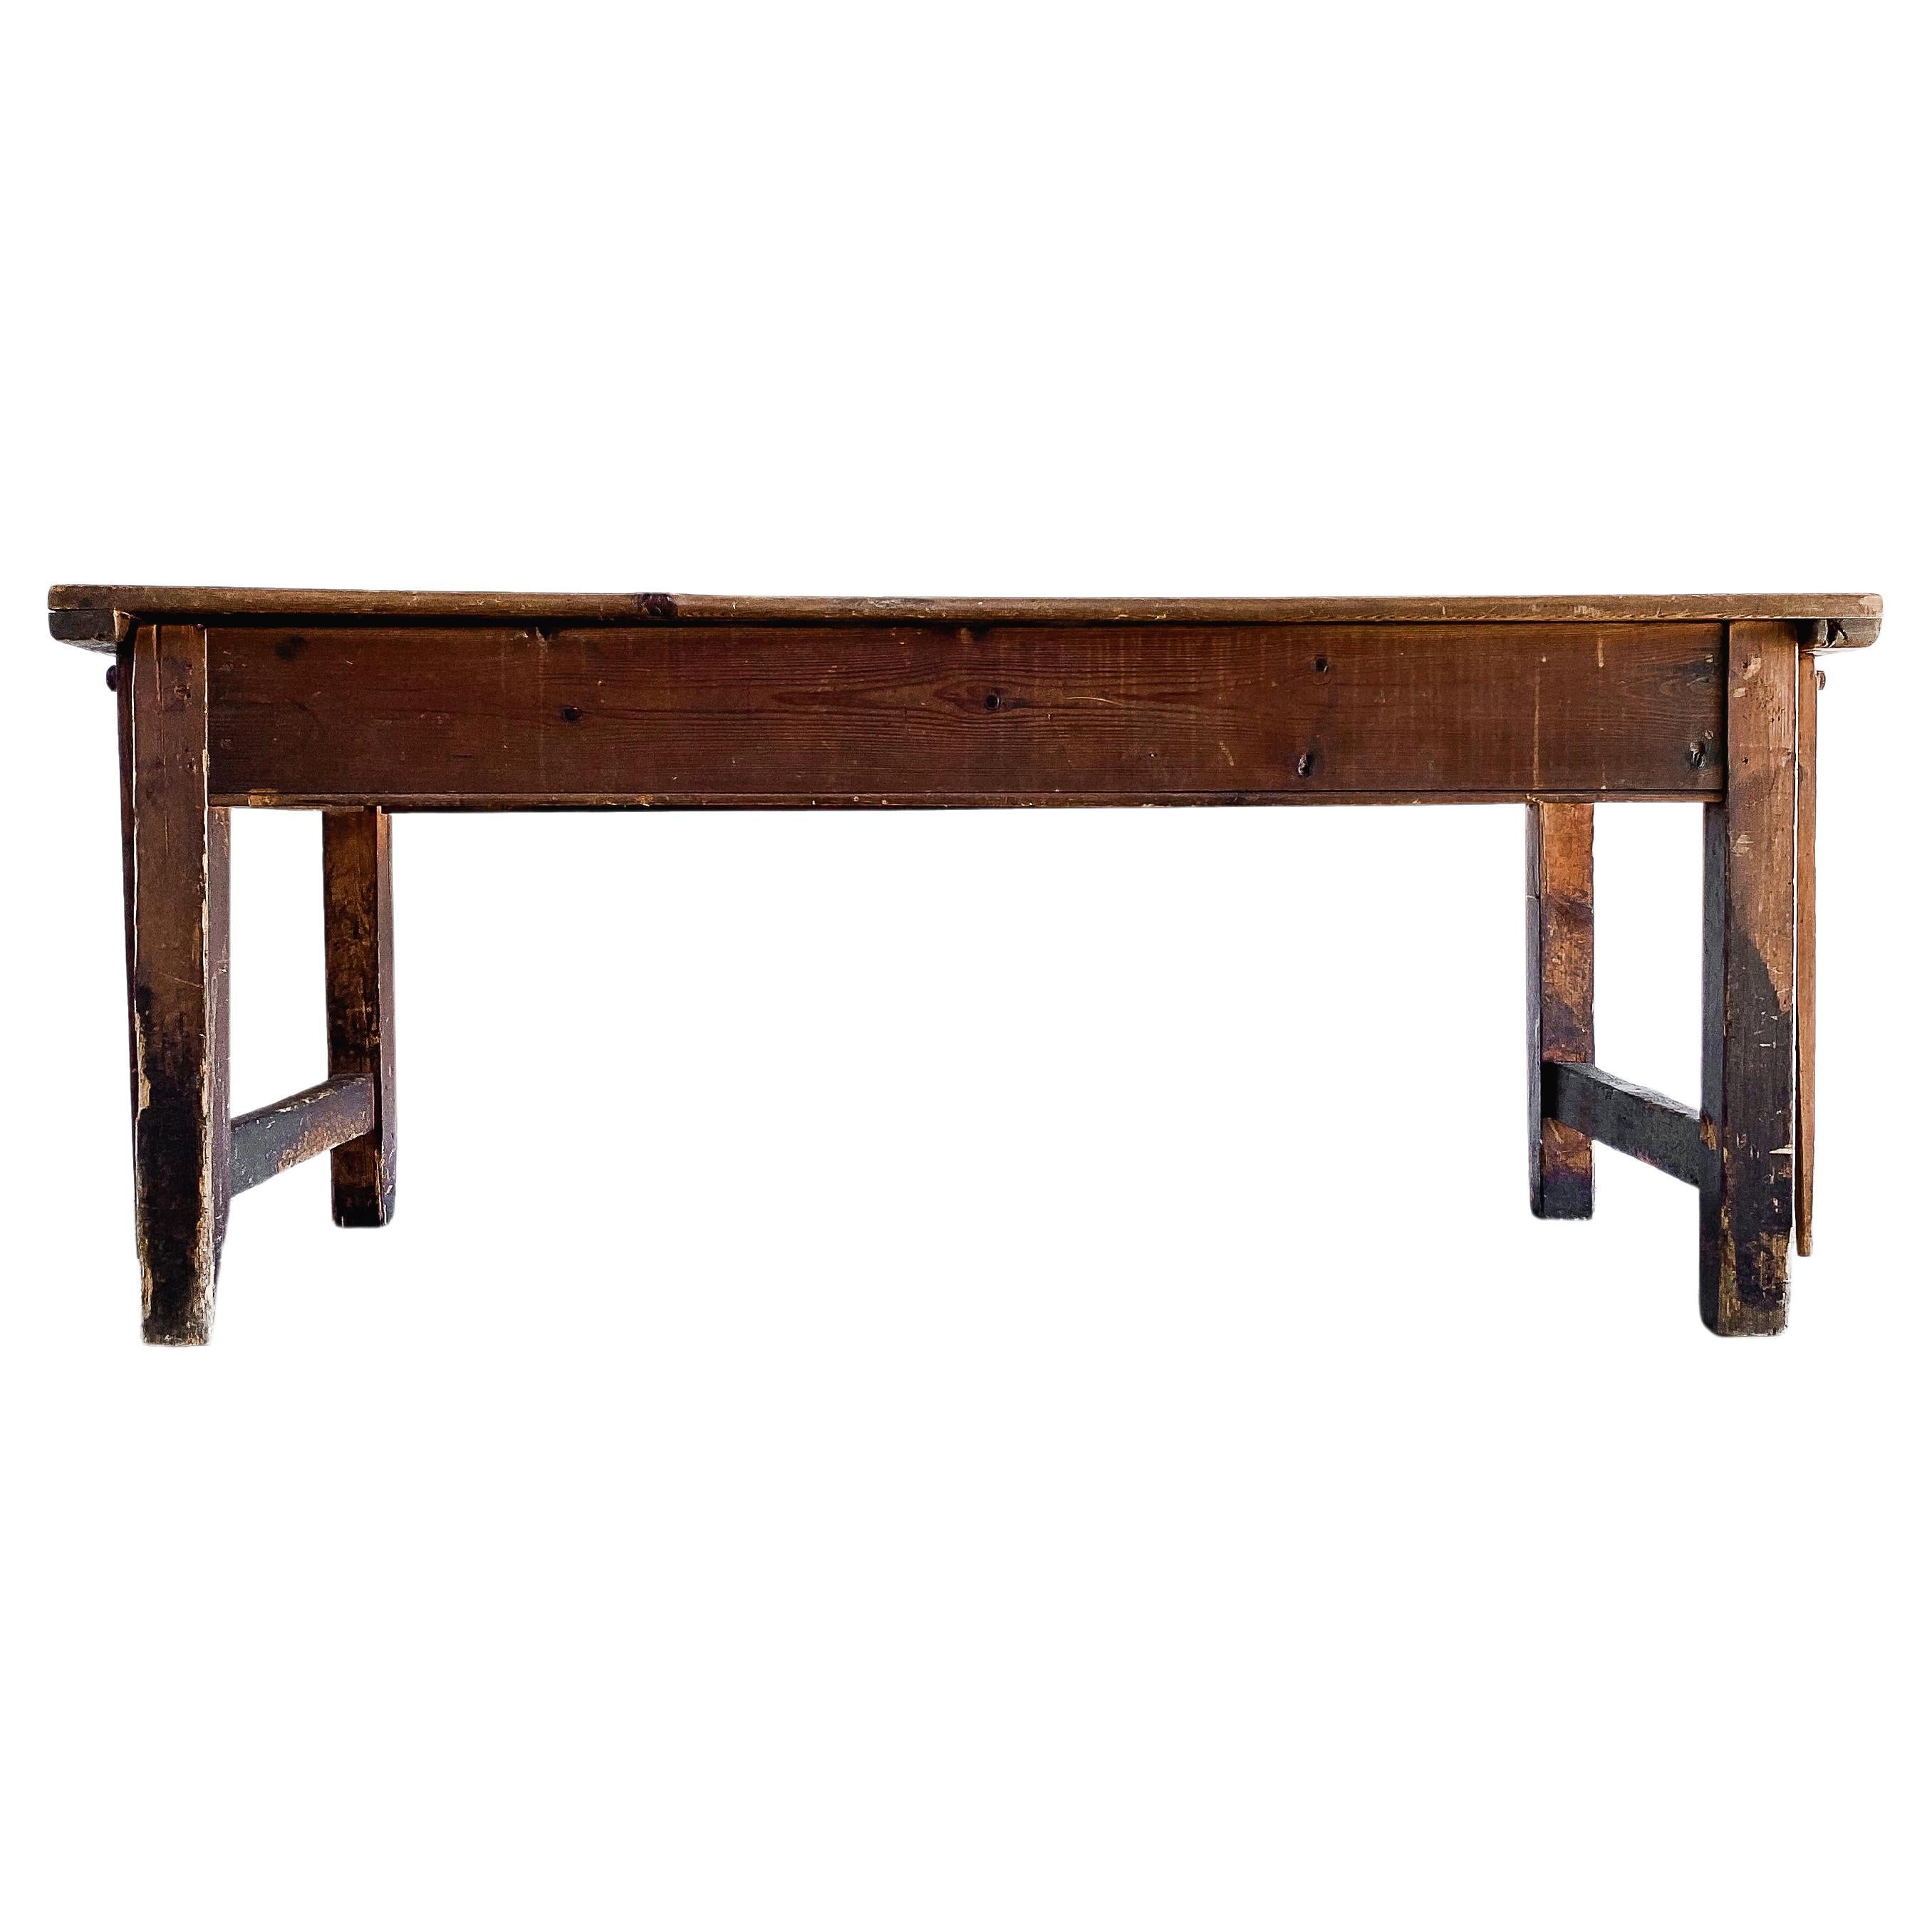 Antique Mercantile Table with Hinged Top